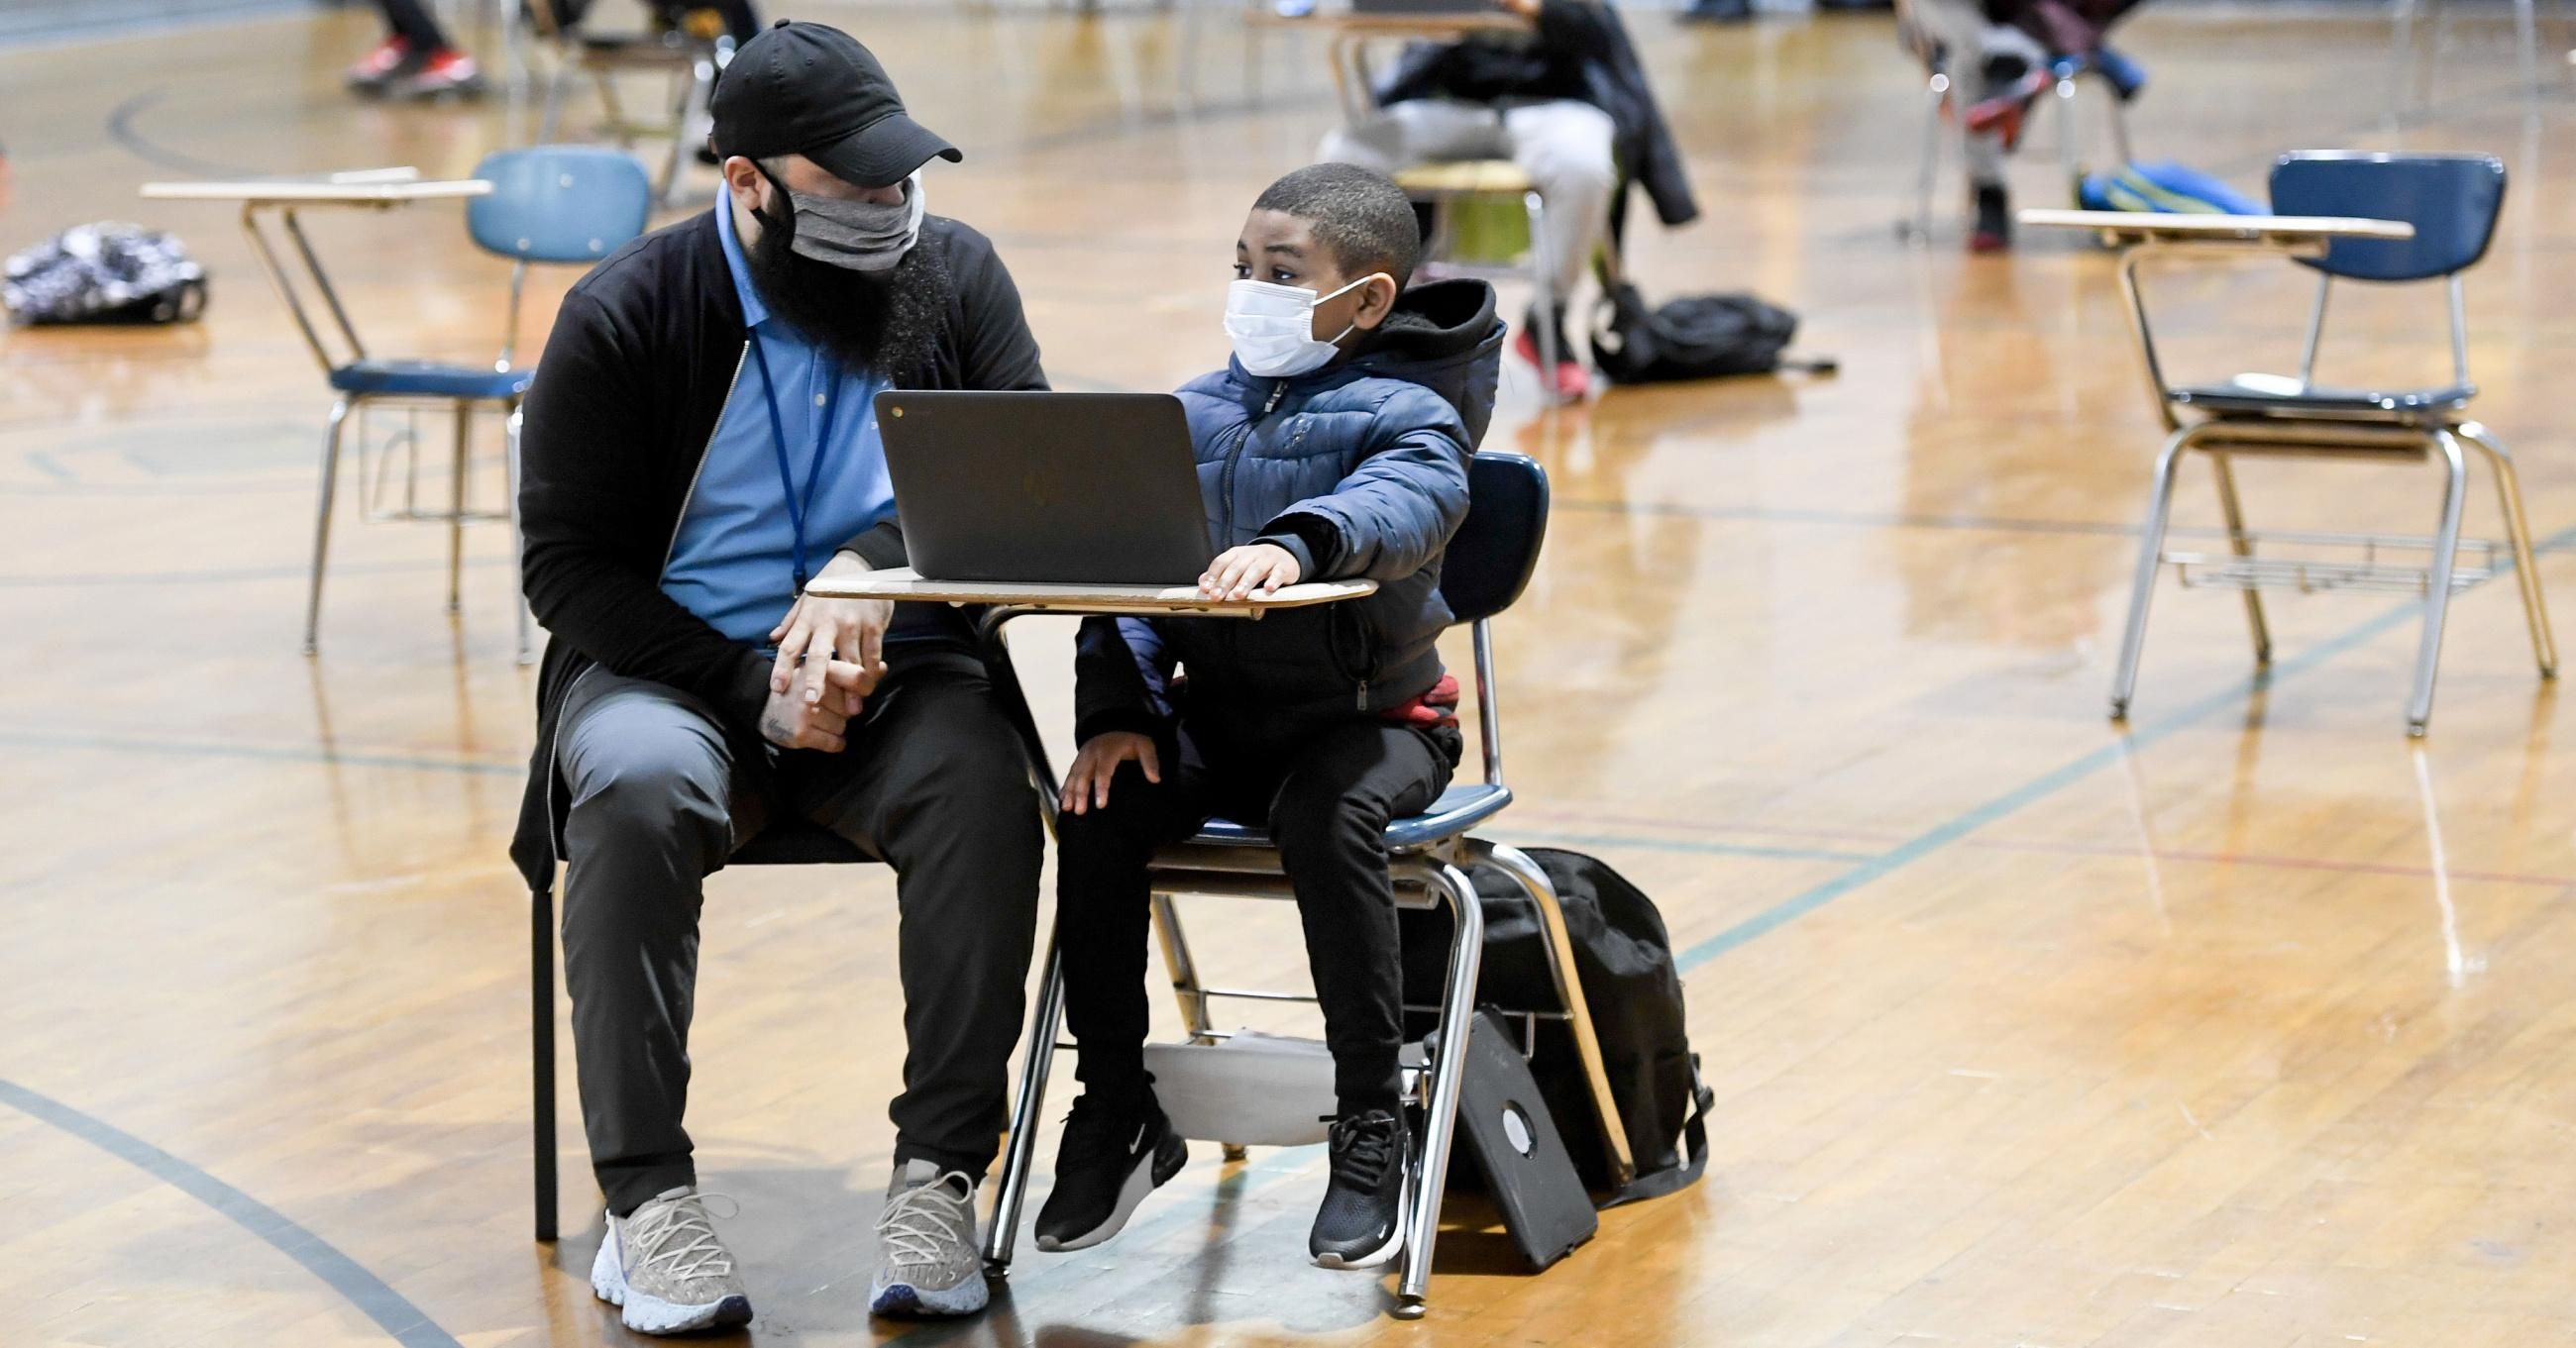 Jordan Rodriguez, director of the Mulberry Street club, works with Santana Sanford, 7, a second grade student, as he does his school work on a laptop computer in Reading, Pennsylvania on January 19, 2021. (Photo: Ben Hasty/MediaNews Group/<em>Reading Eagle</em> via Getty Images)